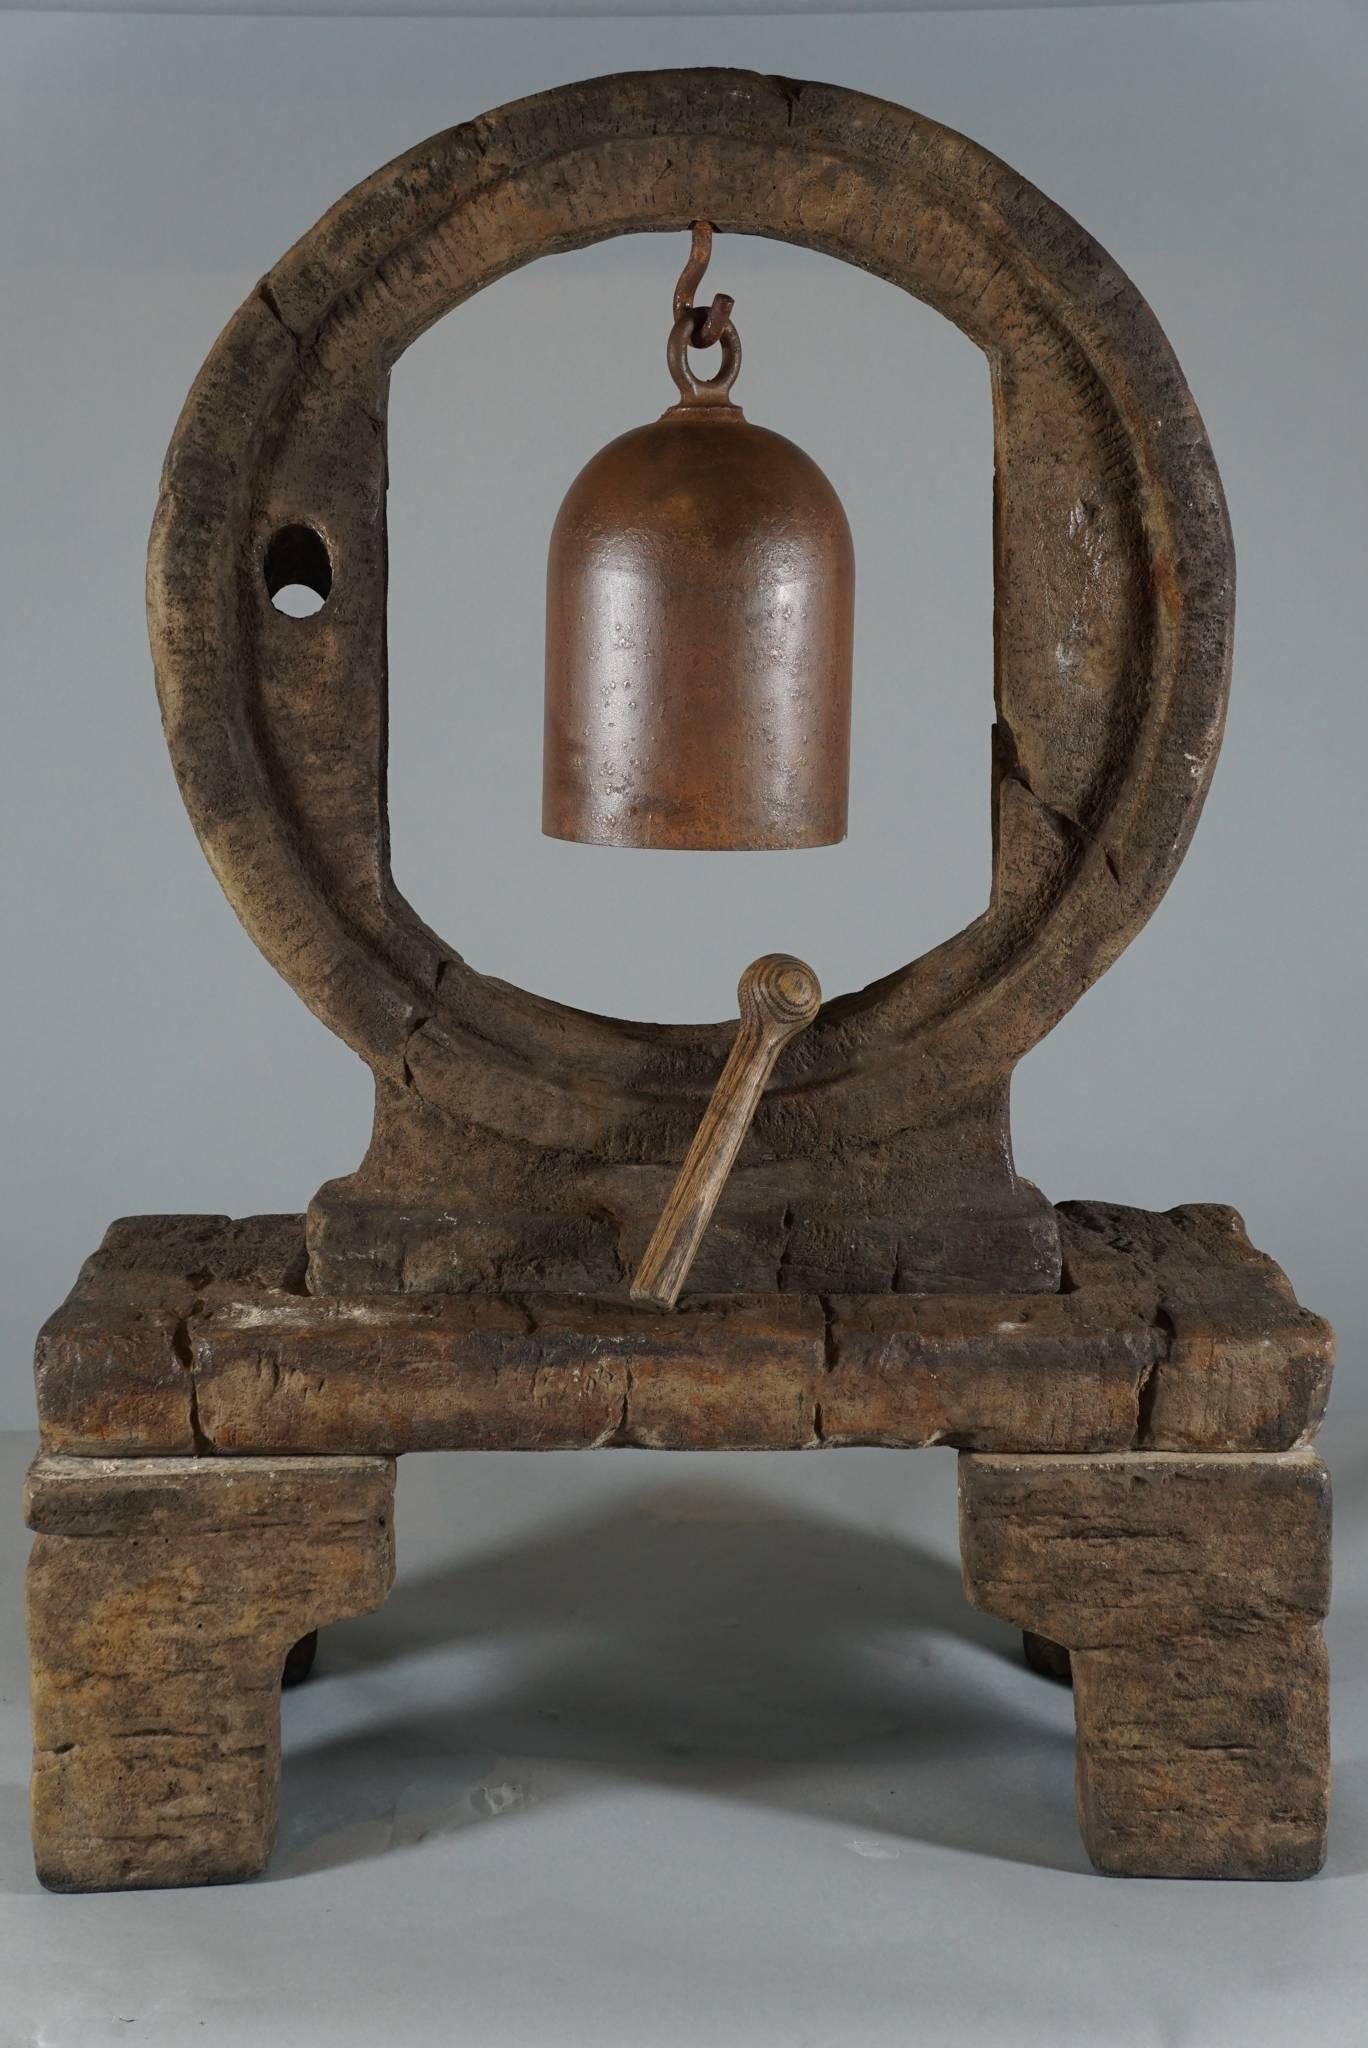 Resonant Iron Bell Suspended in Large Cast Stone Wheel on Stand 2